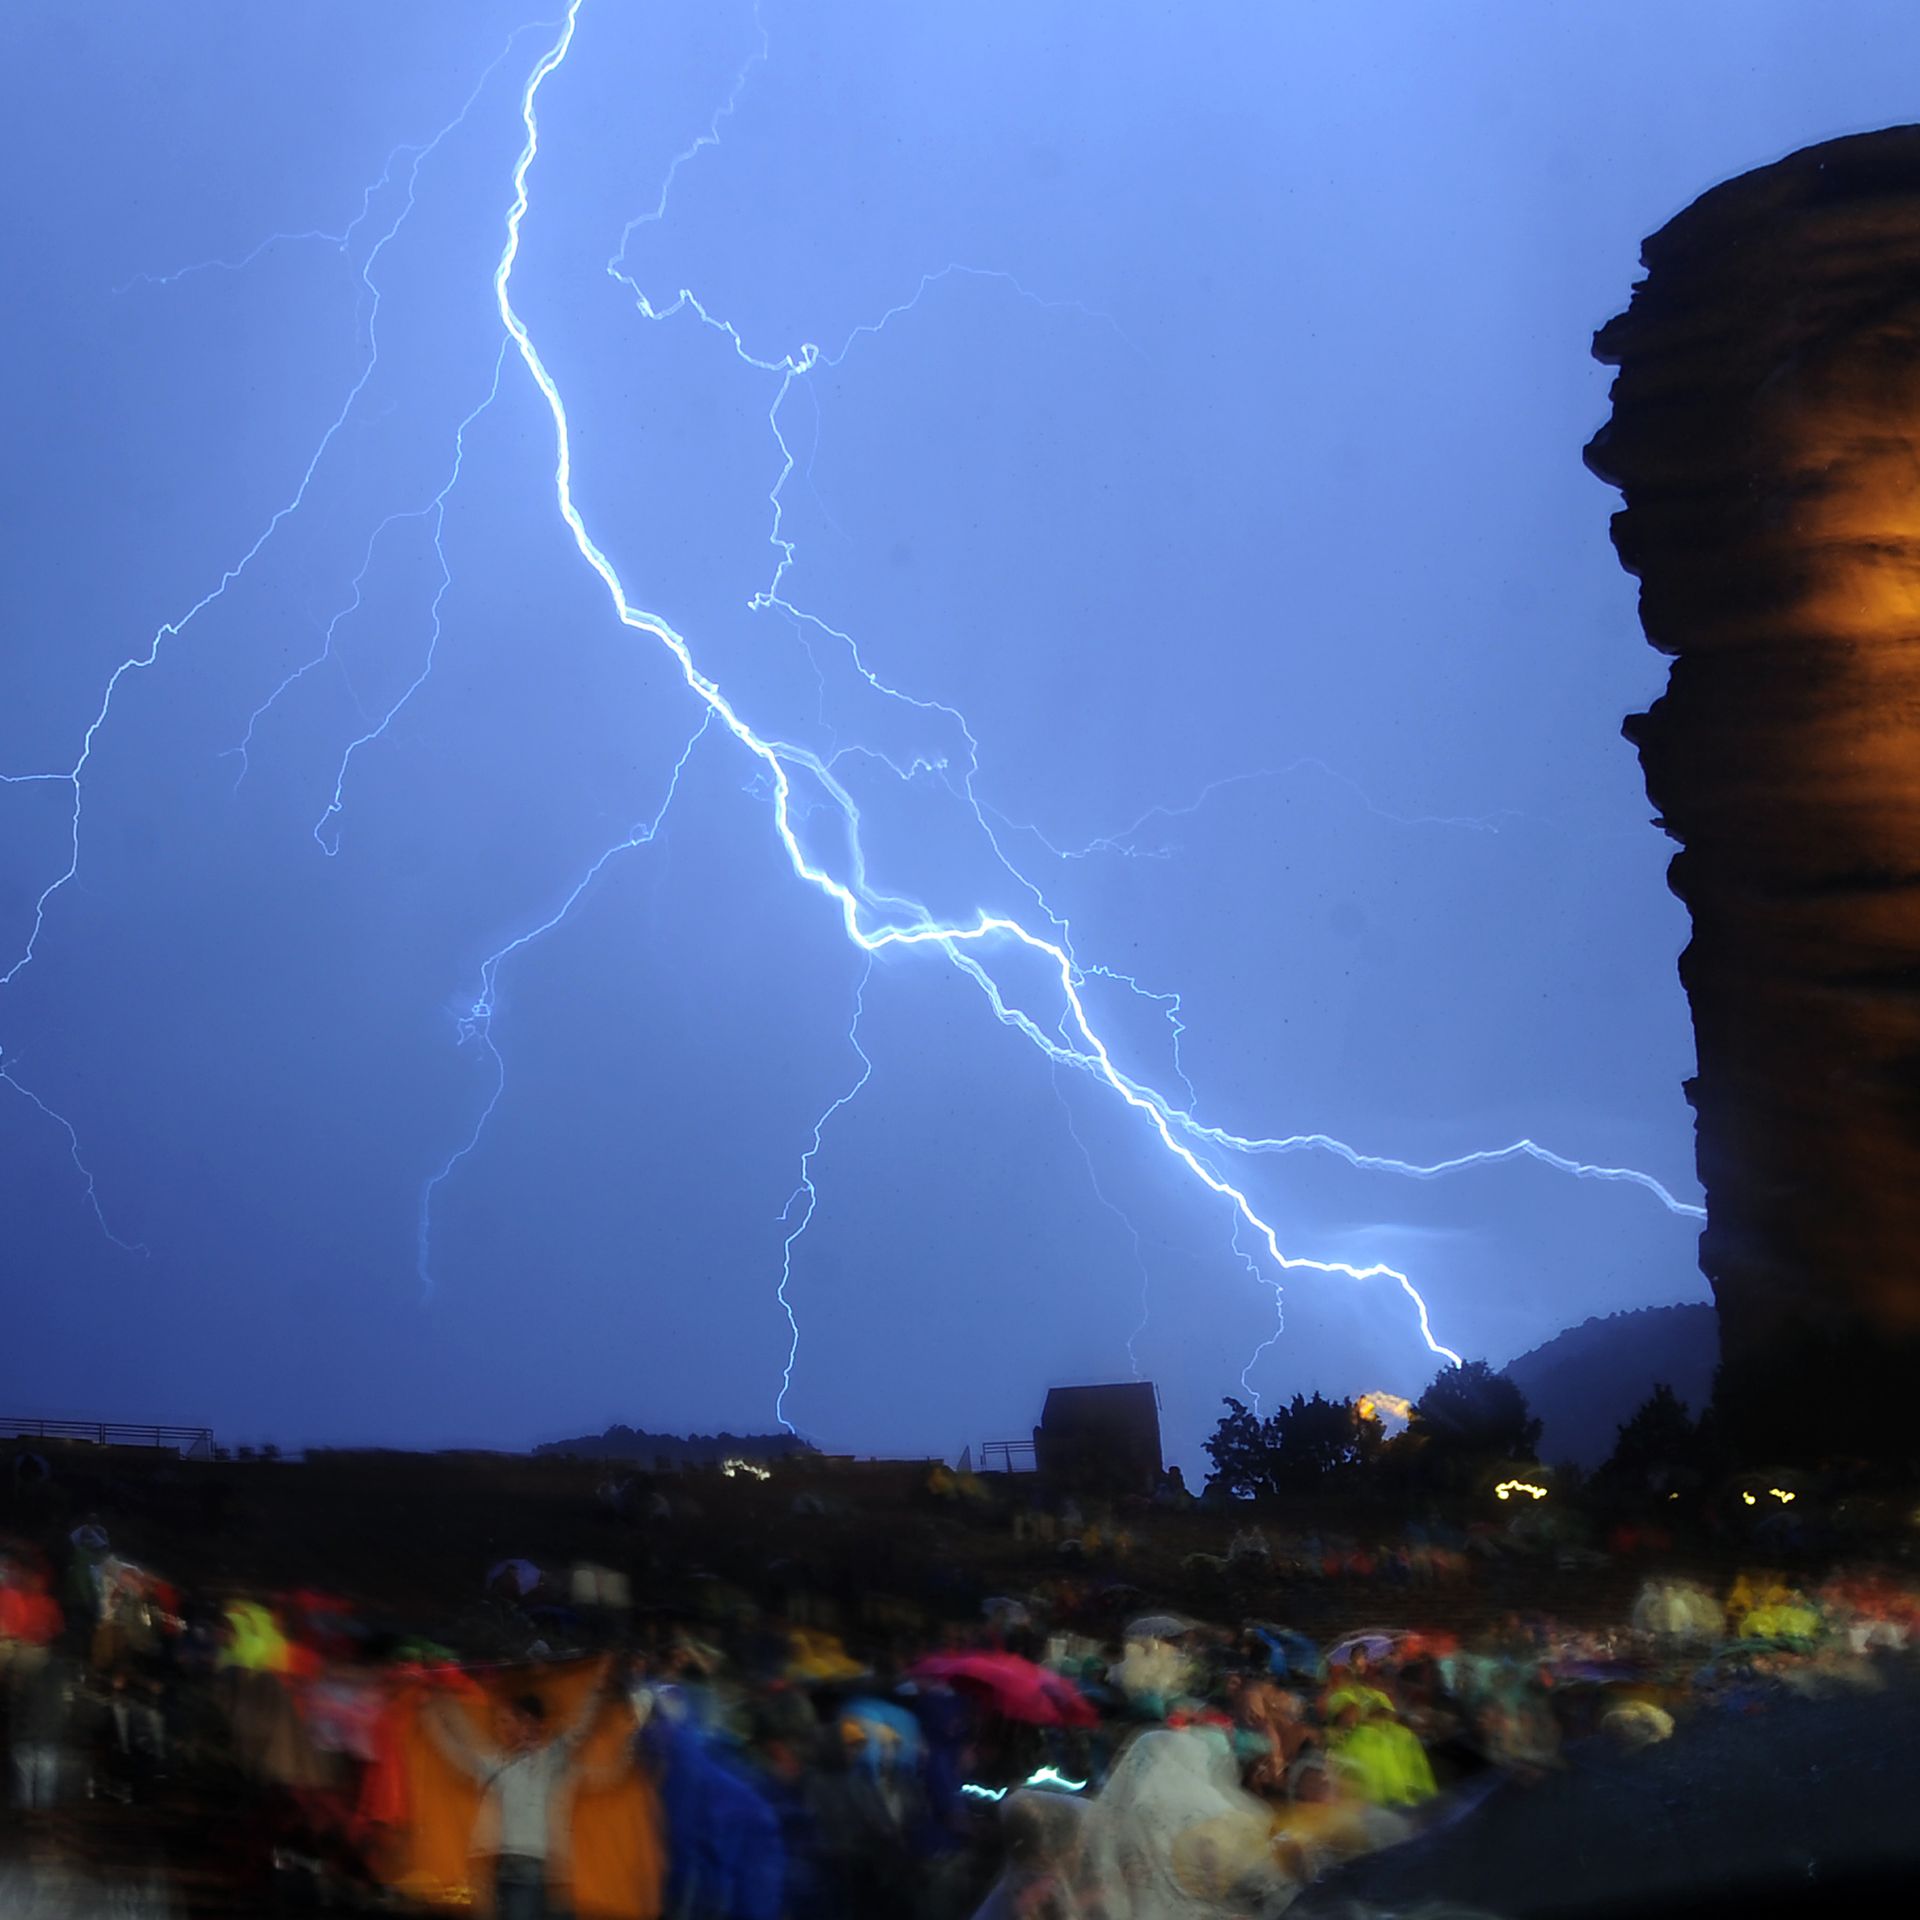 Red Rocks hail storm: Louis Tomlinson concert canceled for weather